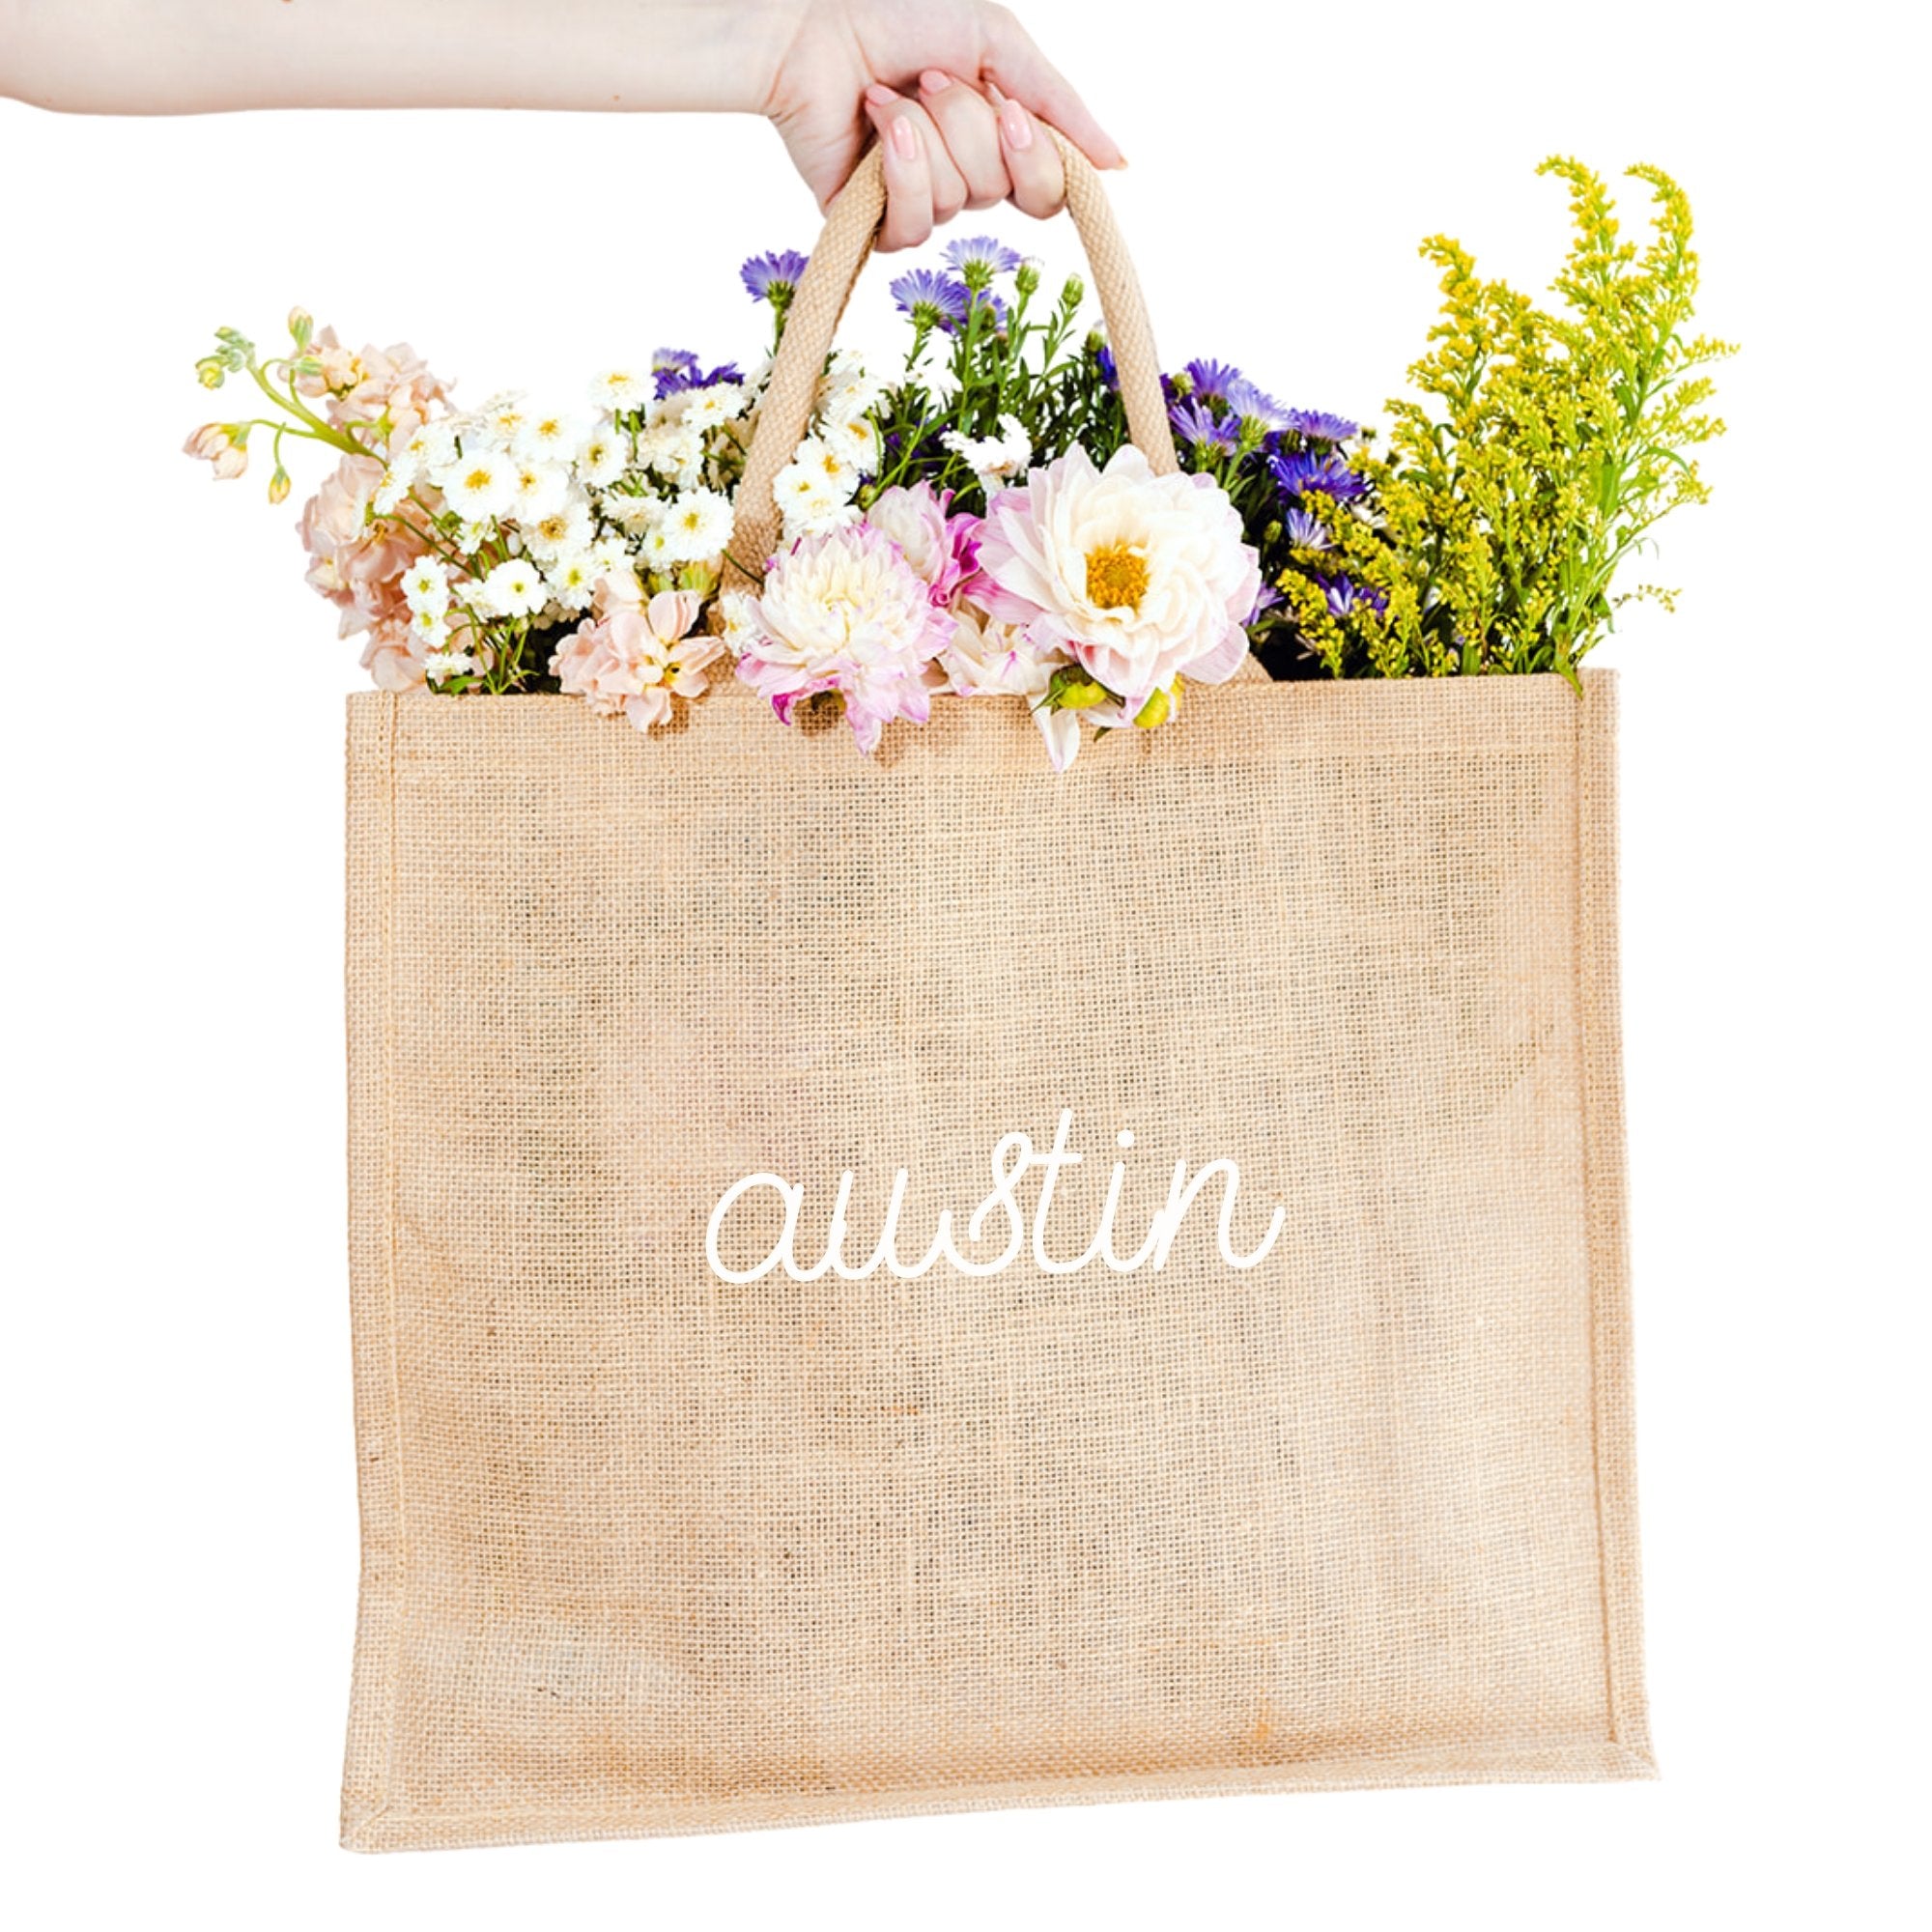 A custom jute bag reads "Austin" on the front in cursive